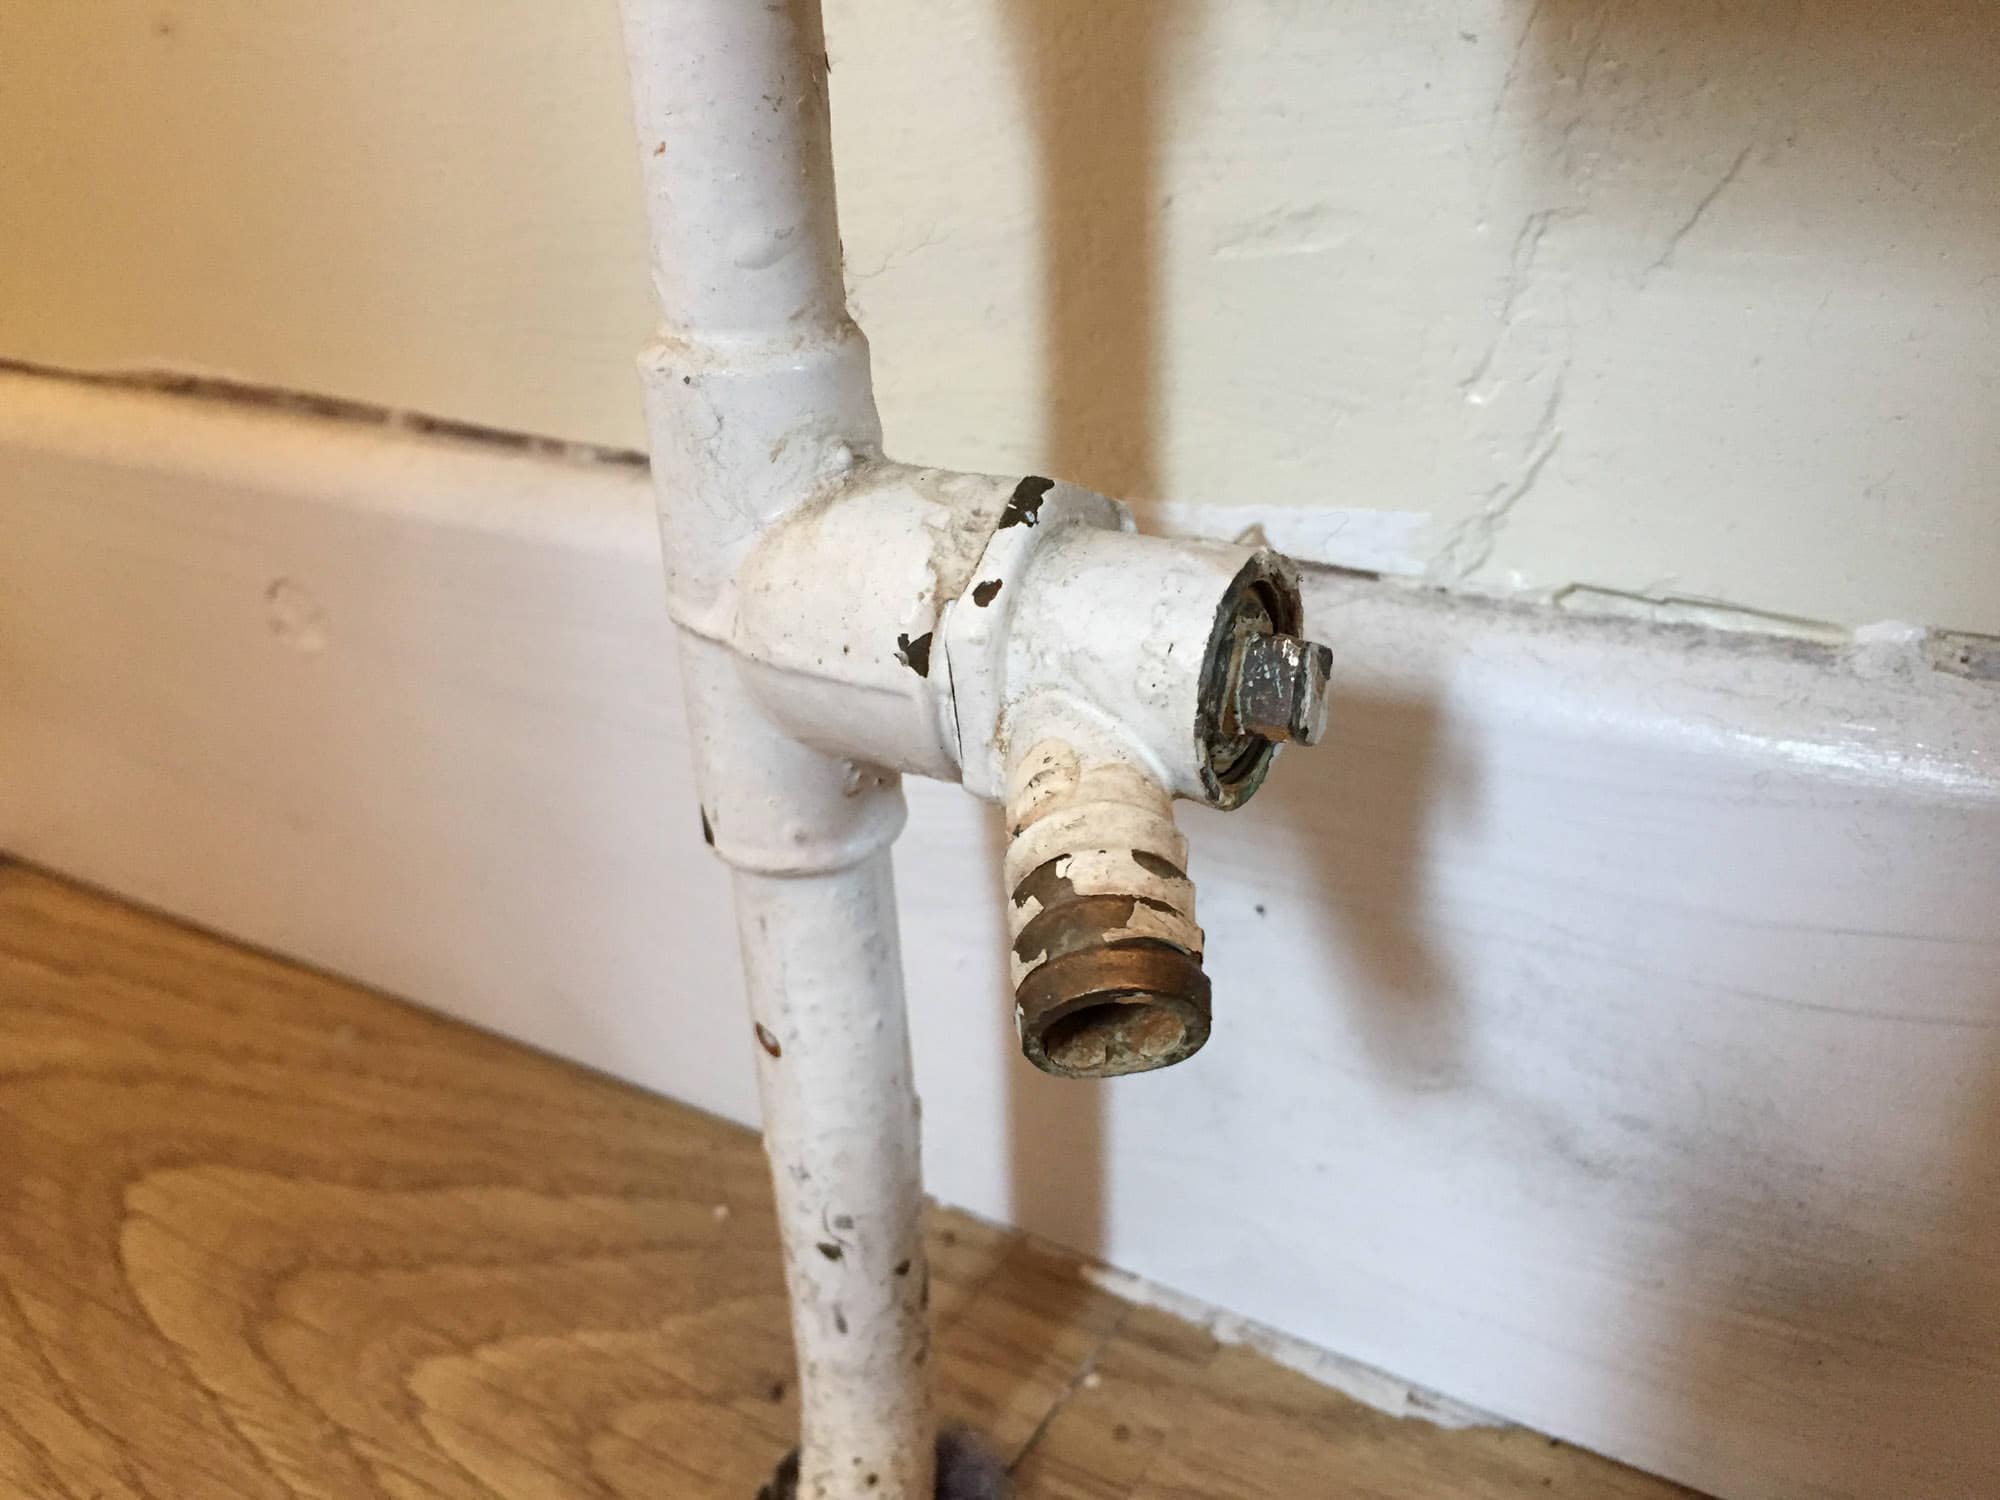 DIY Central Heating Flush – simple & something you can & should do!